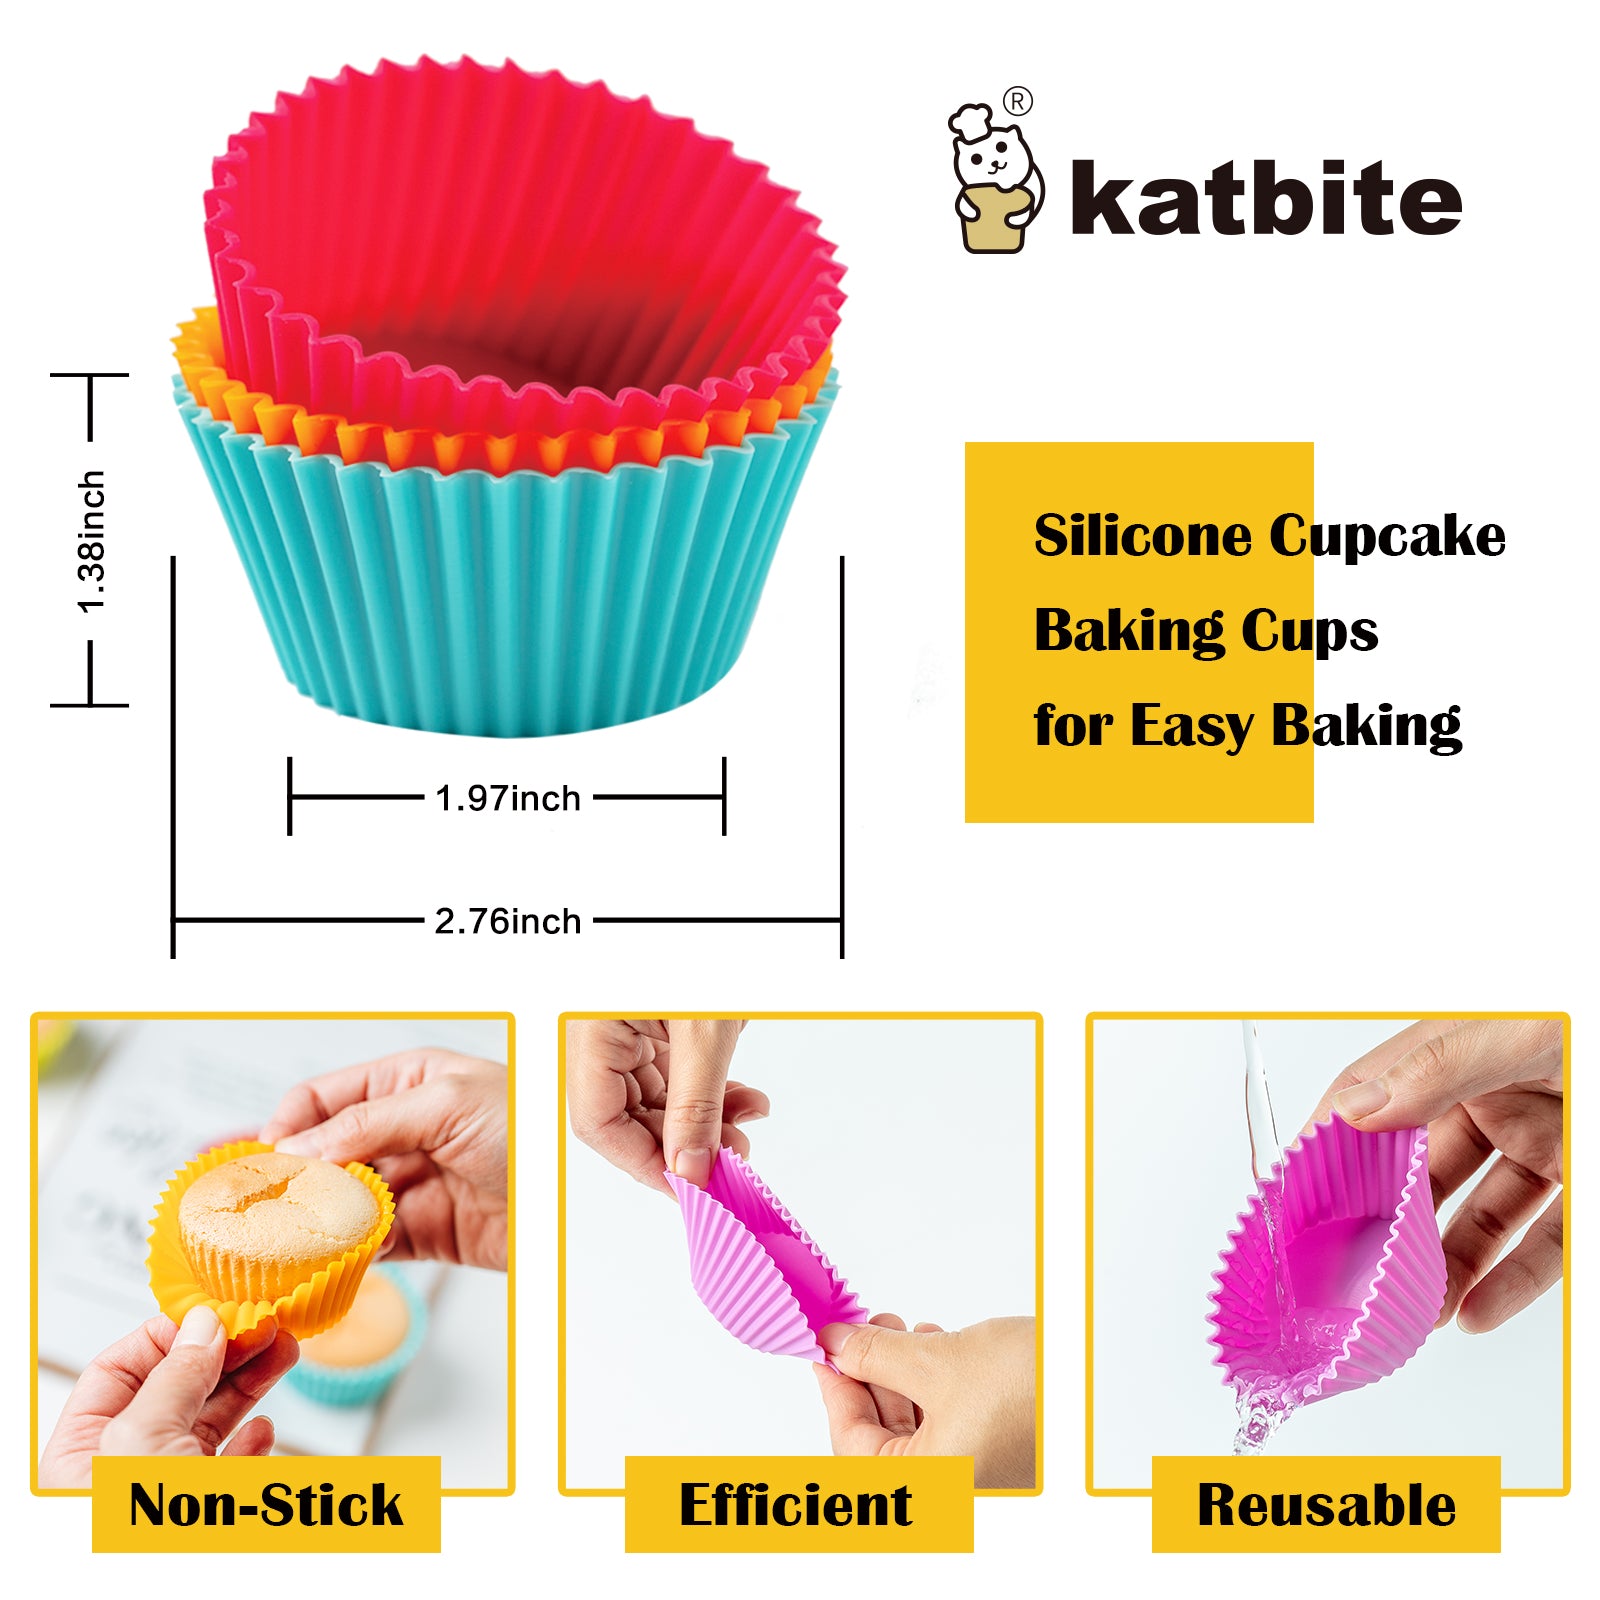 Silicone Cupcake Liners, 24 Count Cupcake Baking Cups,Purple, Size: Small